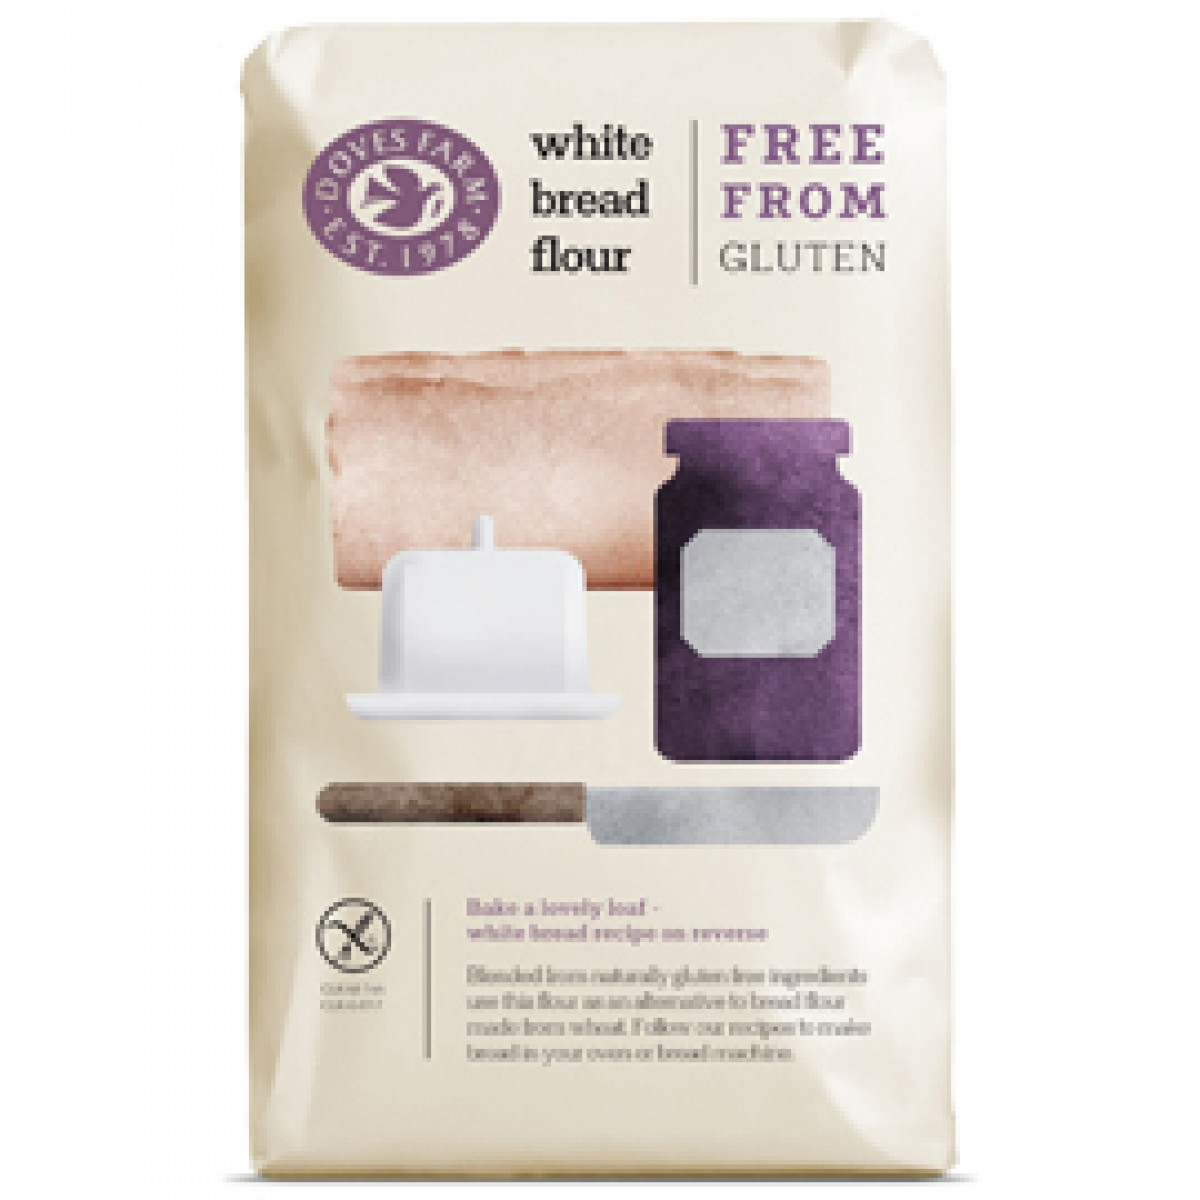 Product picture for White Bread Flour